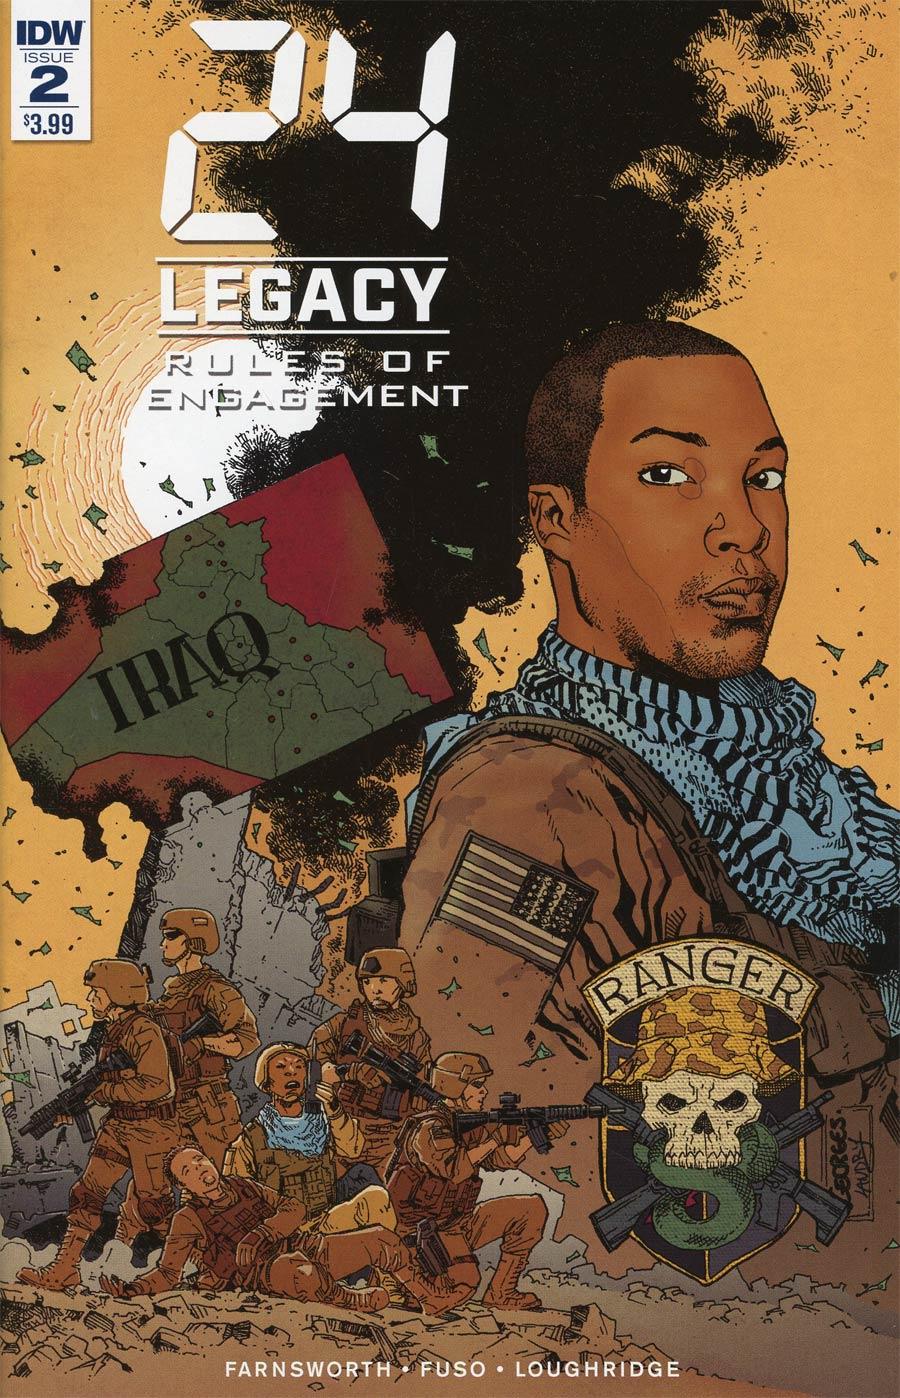 24 Legacy Rules Of Engagement Vol. 1 #2